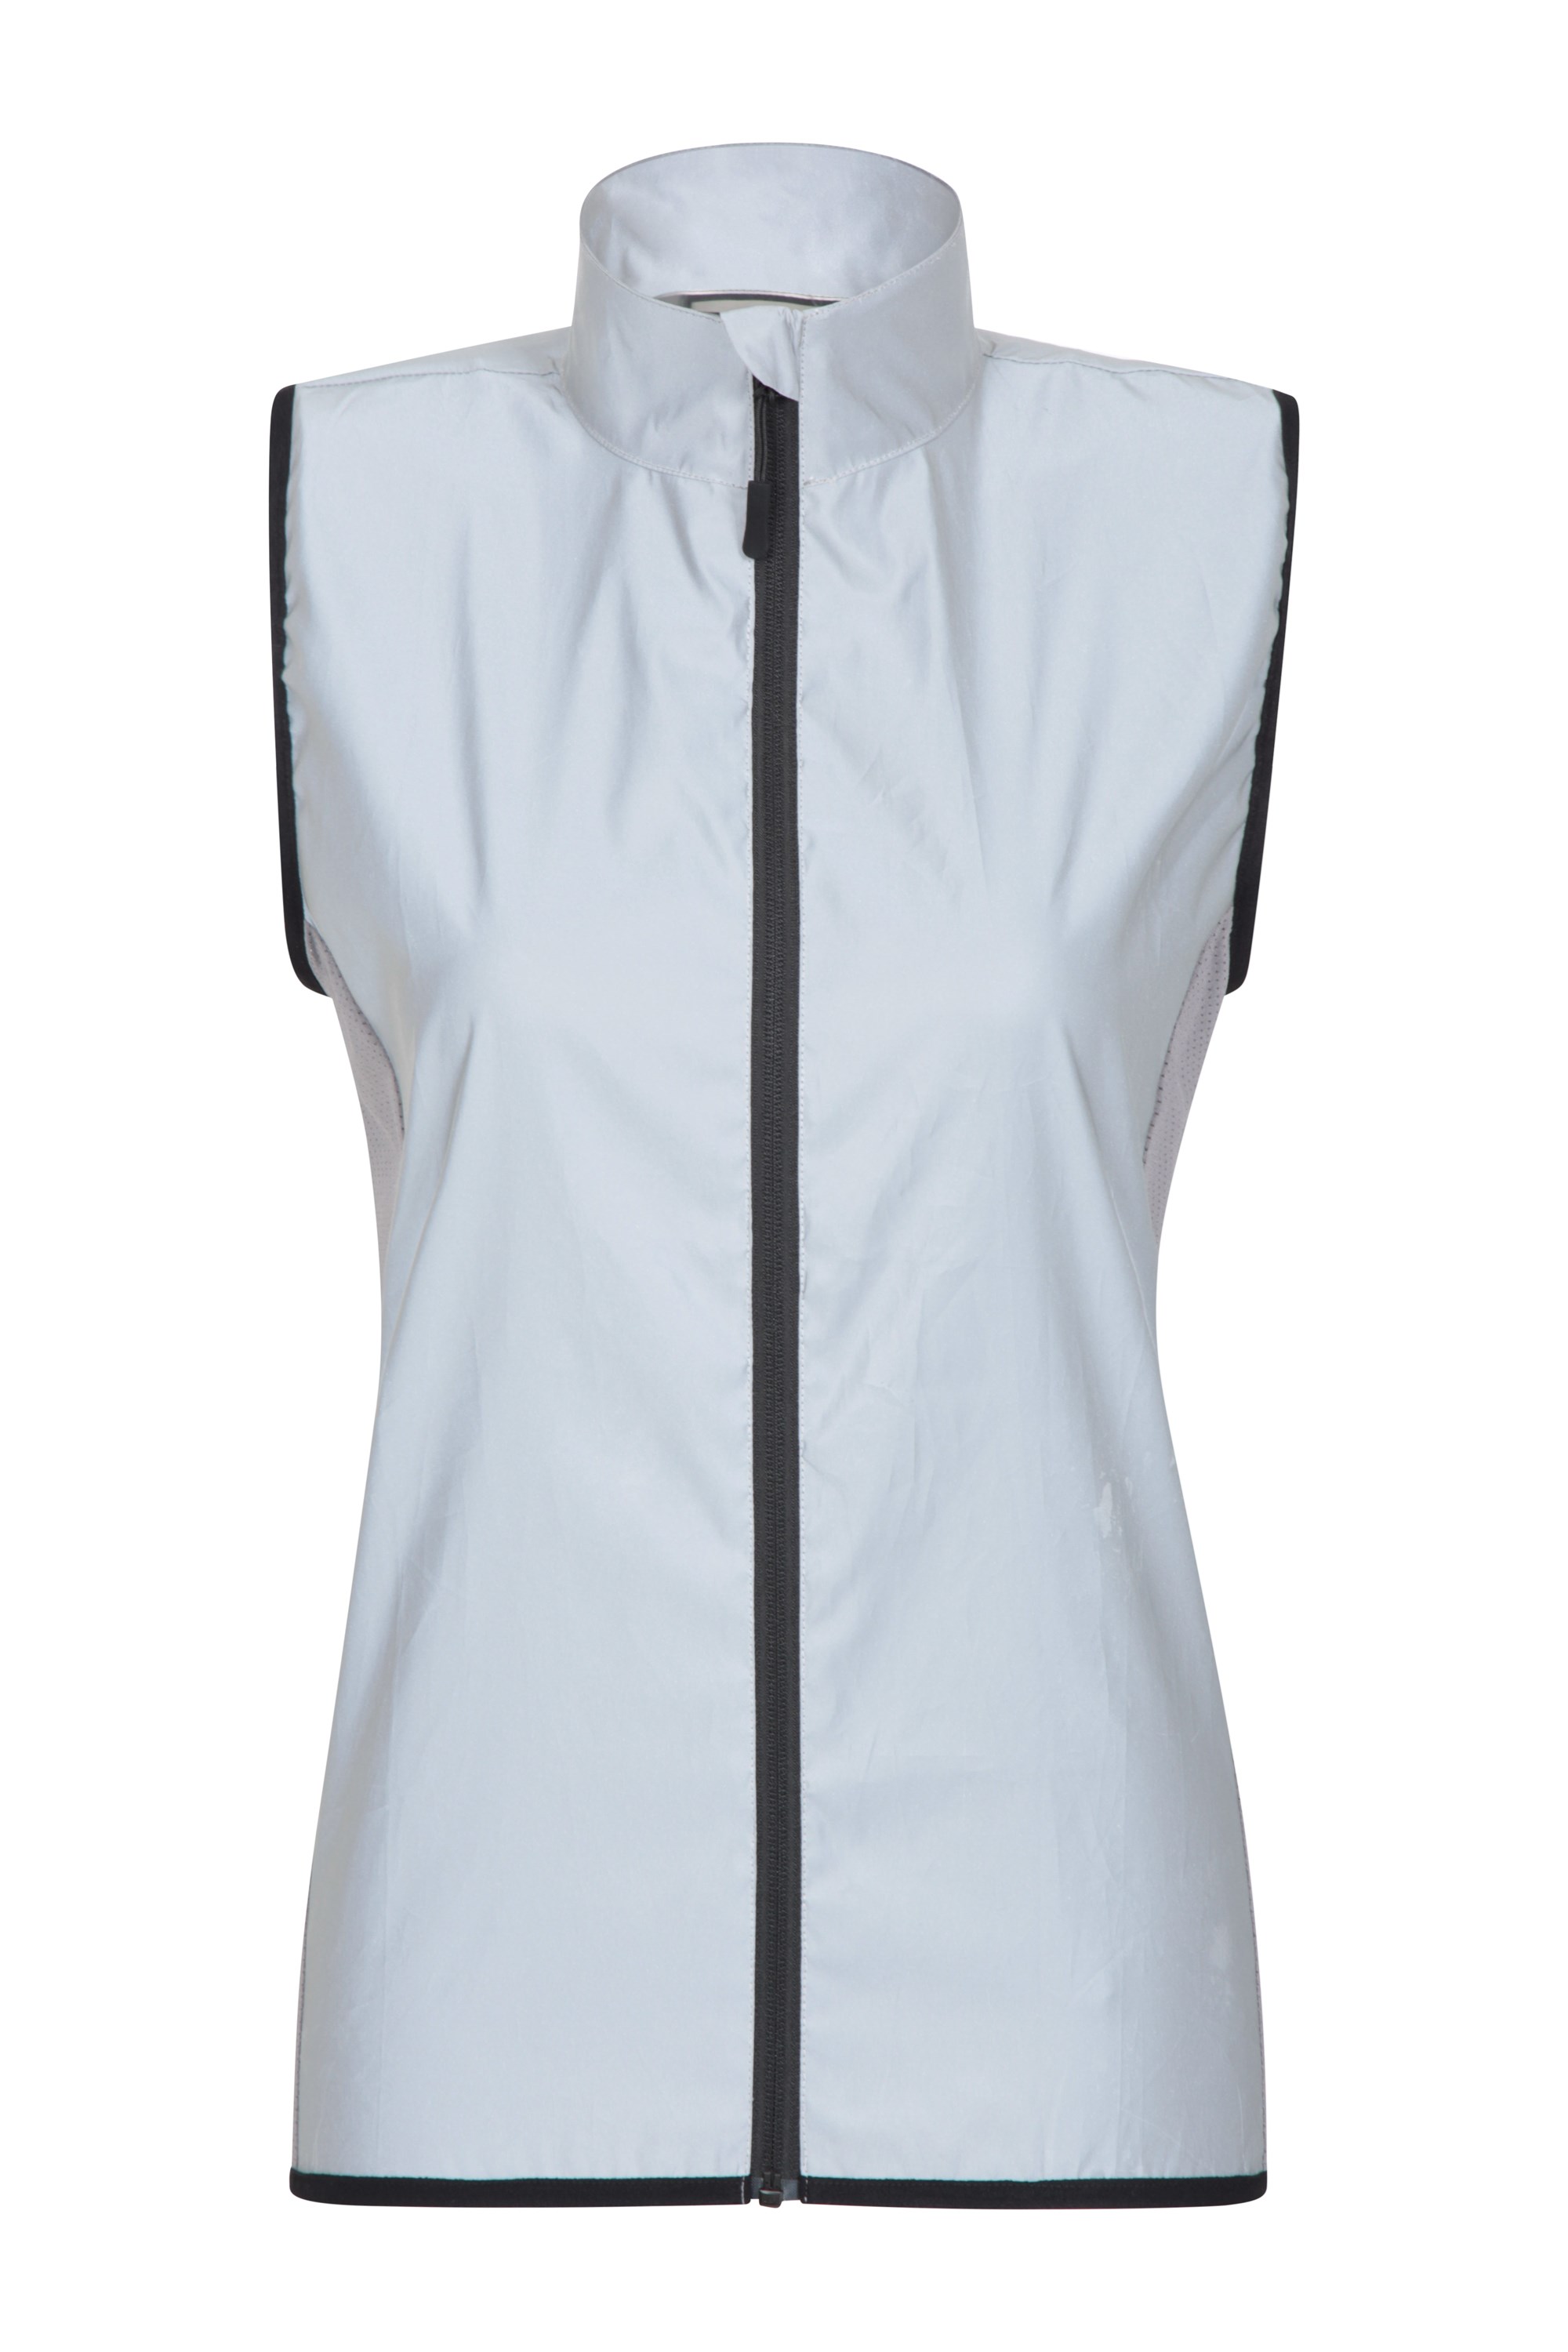 Mountain Warehouse 360 Silver Reflect Womens Vest Silver